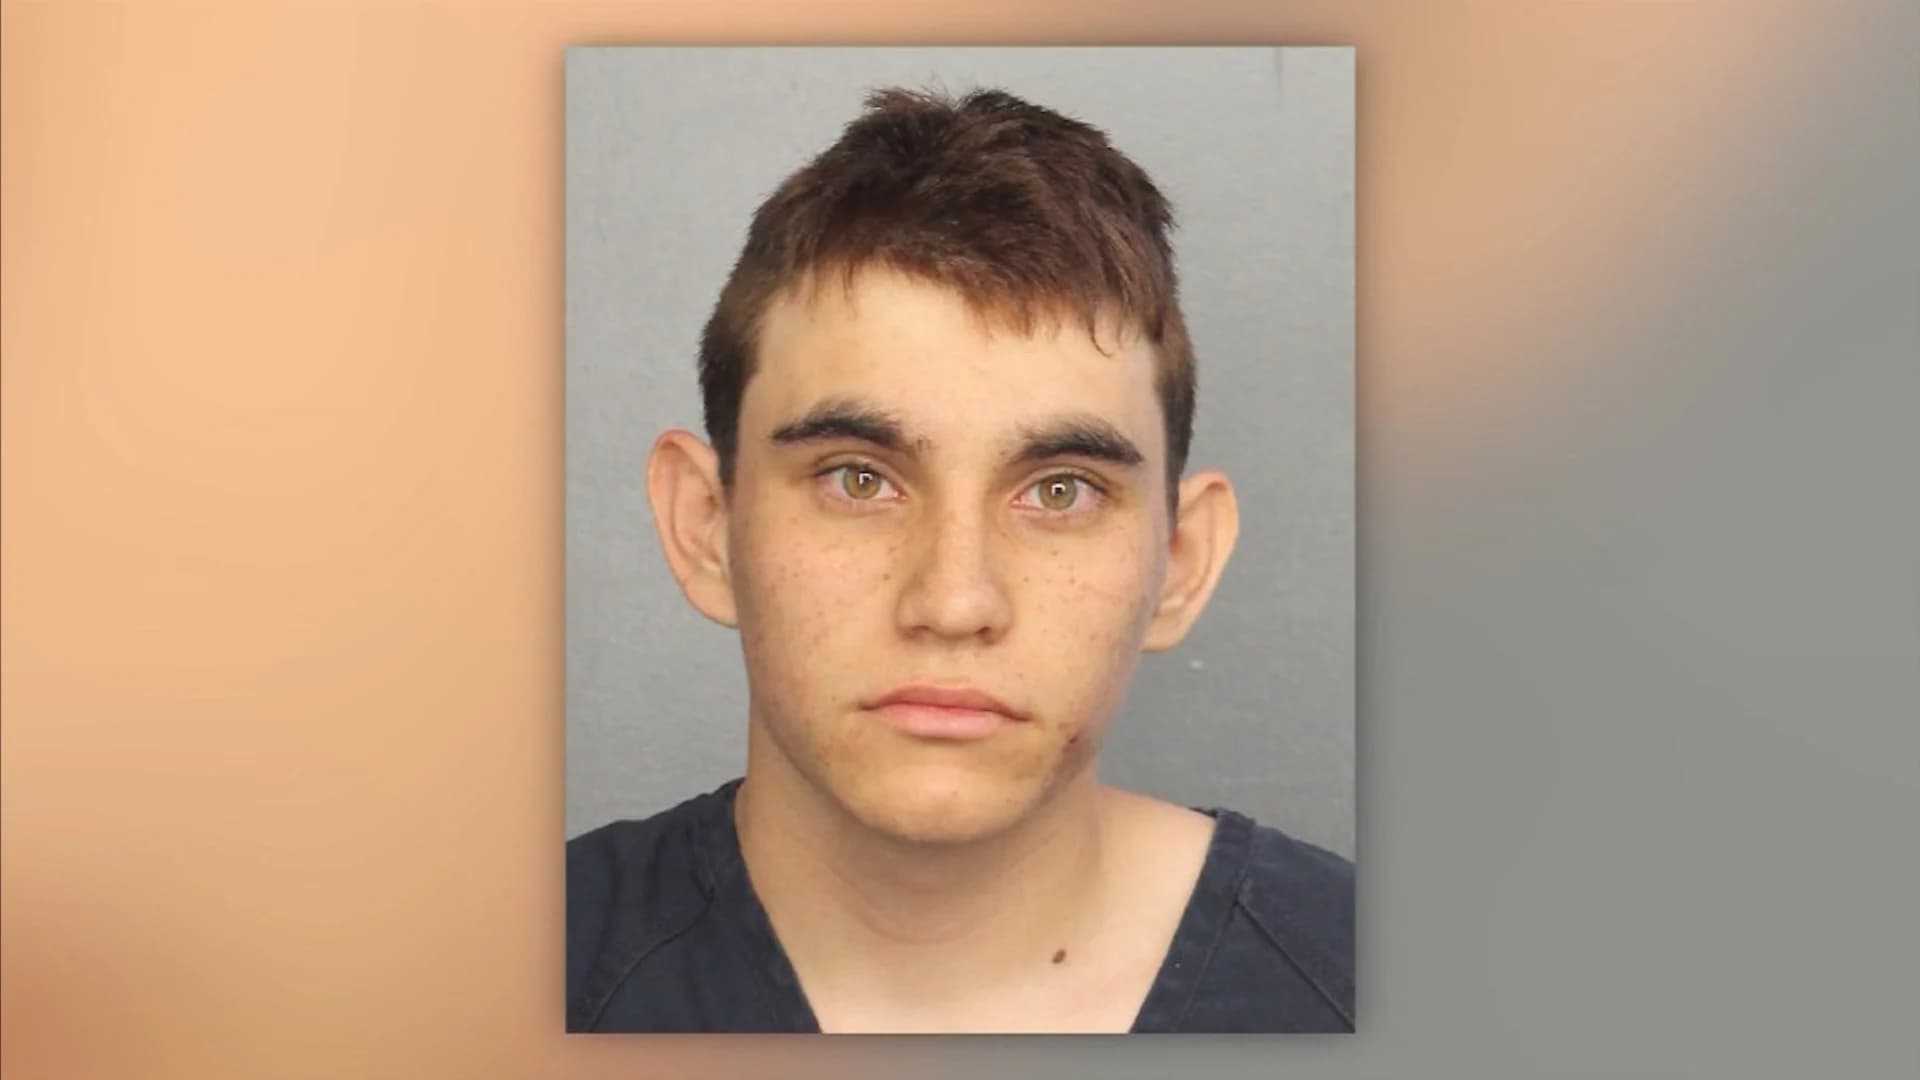 FBI failed to investigate tip on school shooter